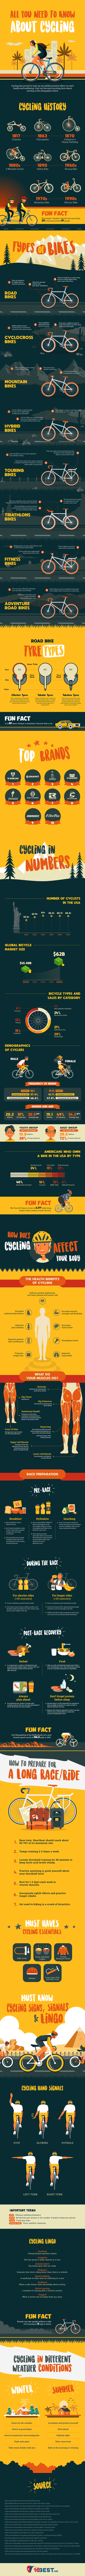 Complete Guide To Cycling Infographic